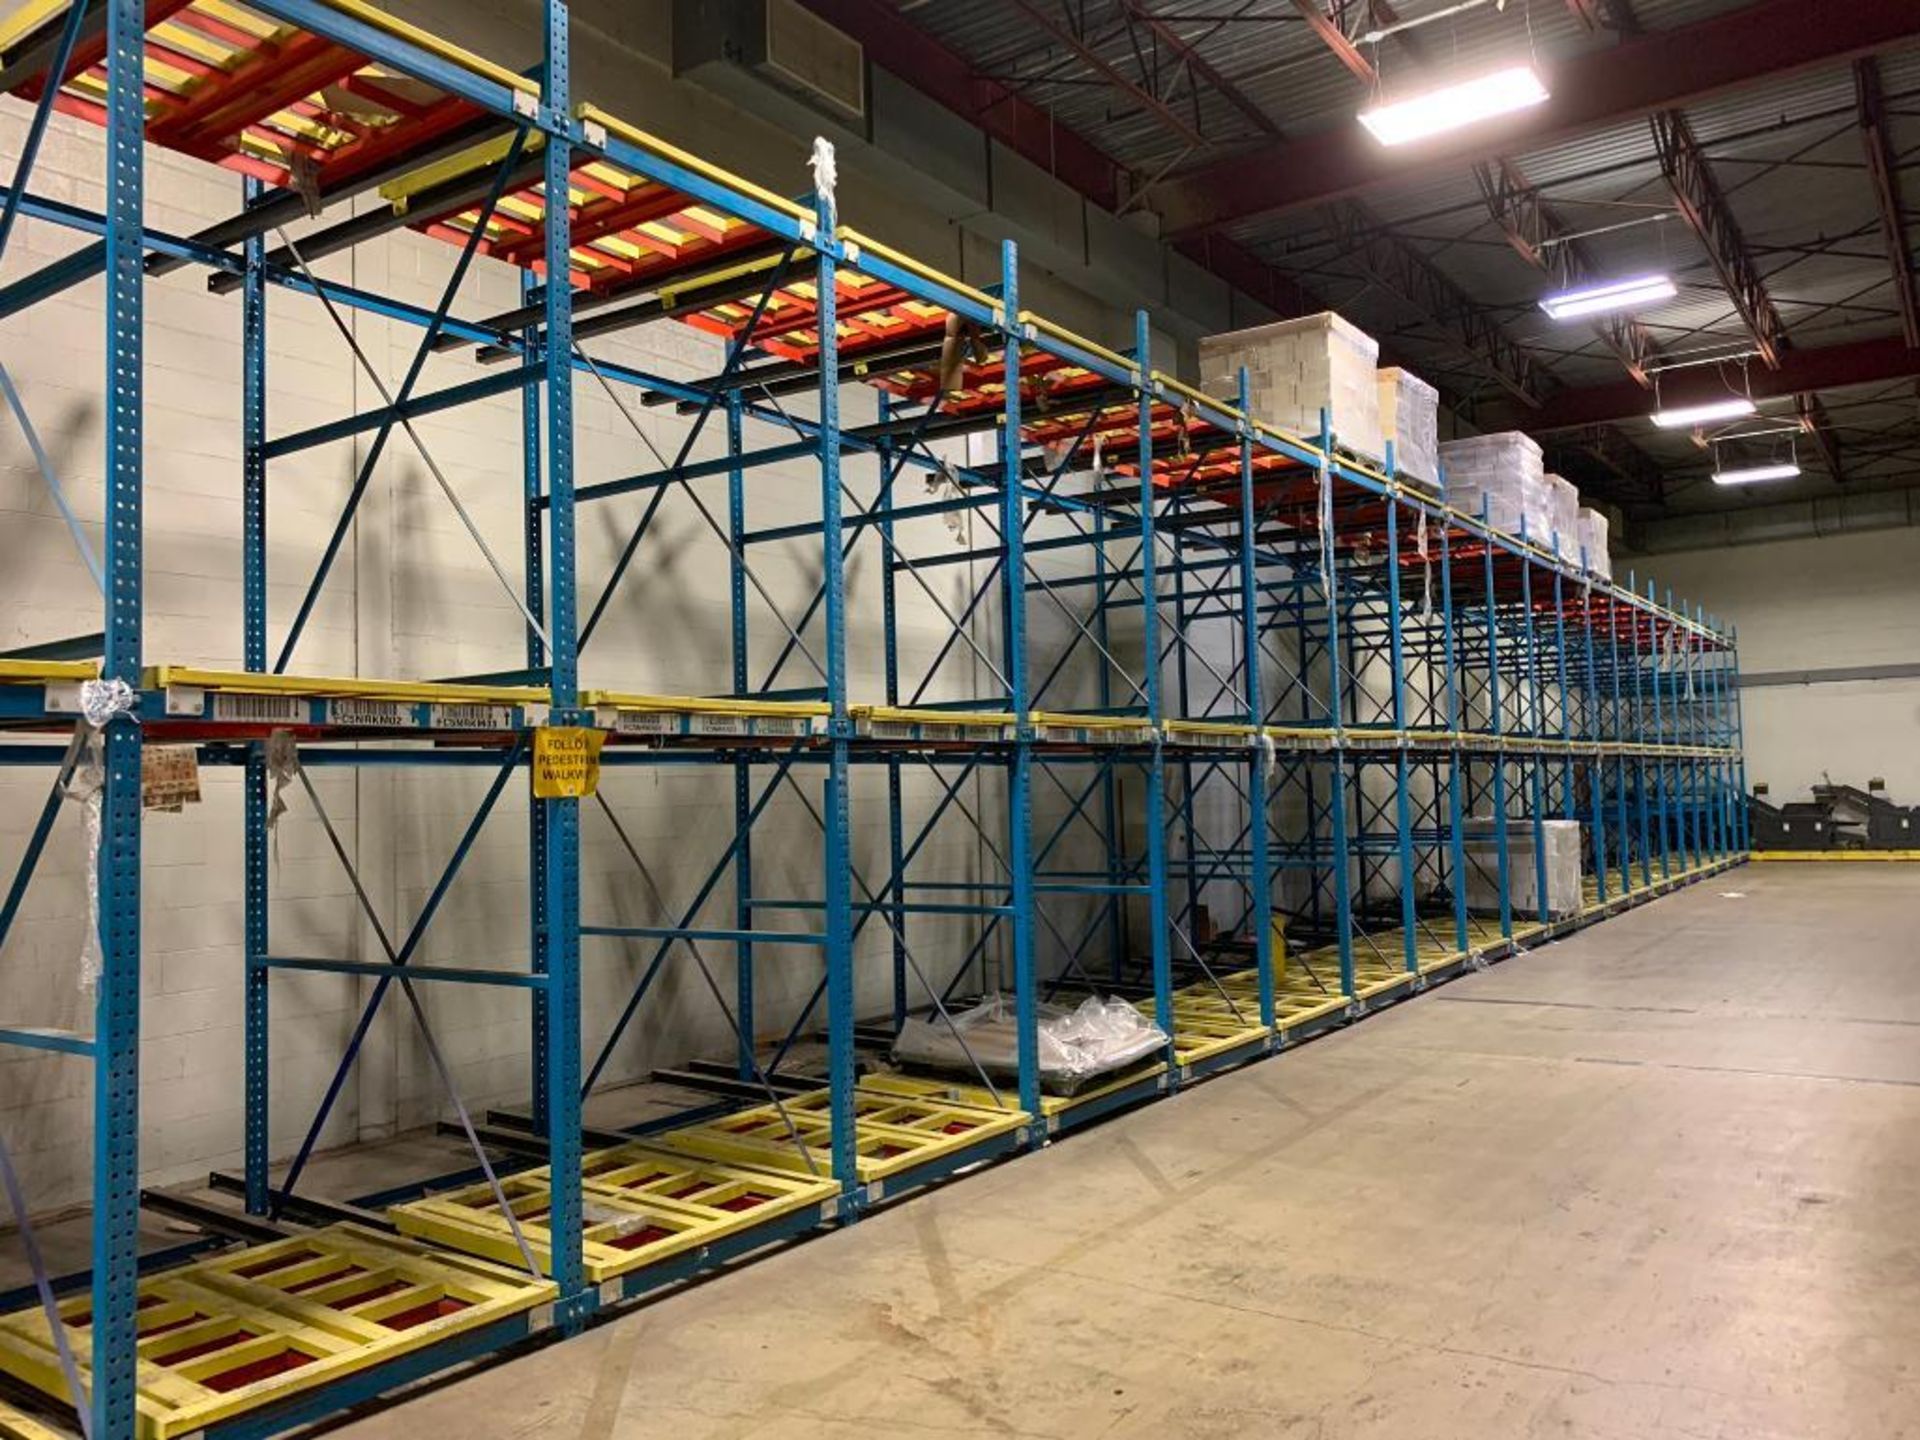 (33x) Bays of Bolt-Together Push-Back Rack; 15' T X 104" D, Each Bay Has (6) Pallet Positions - Image 6 of 10